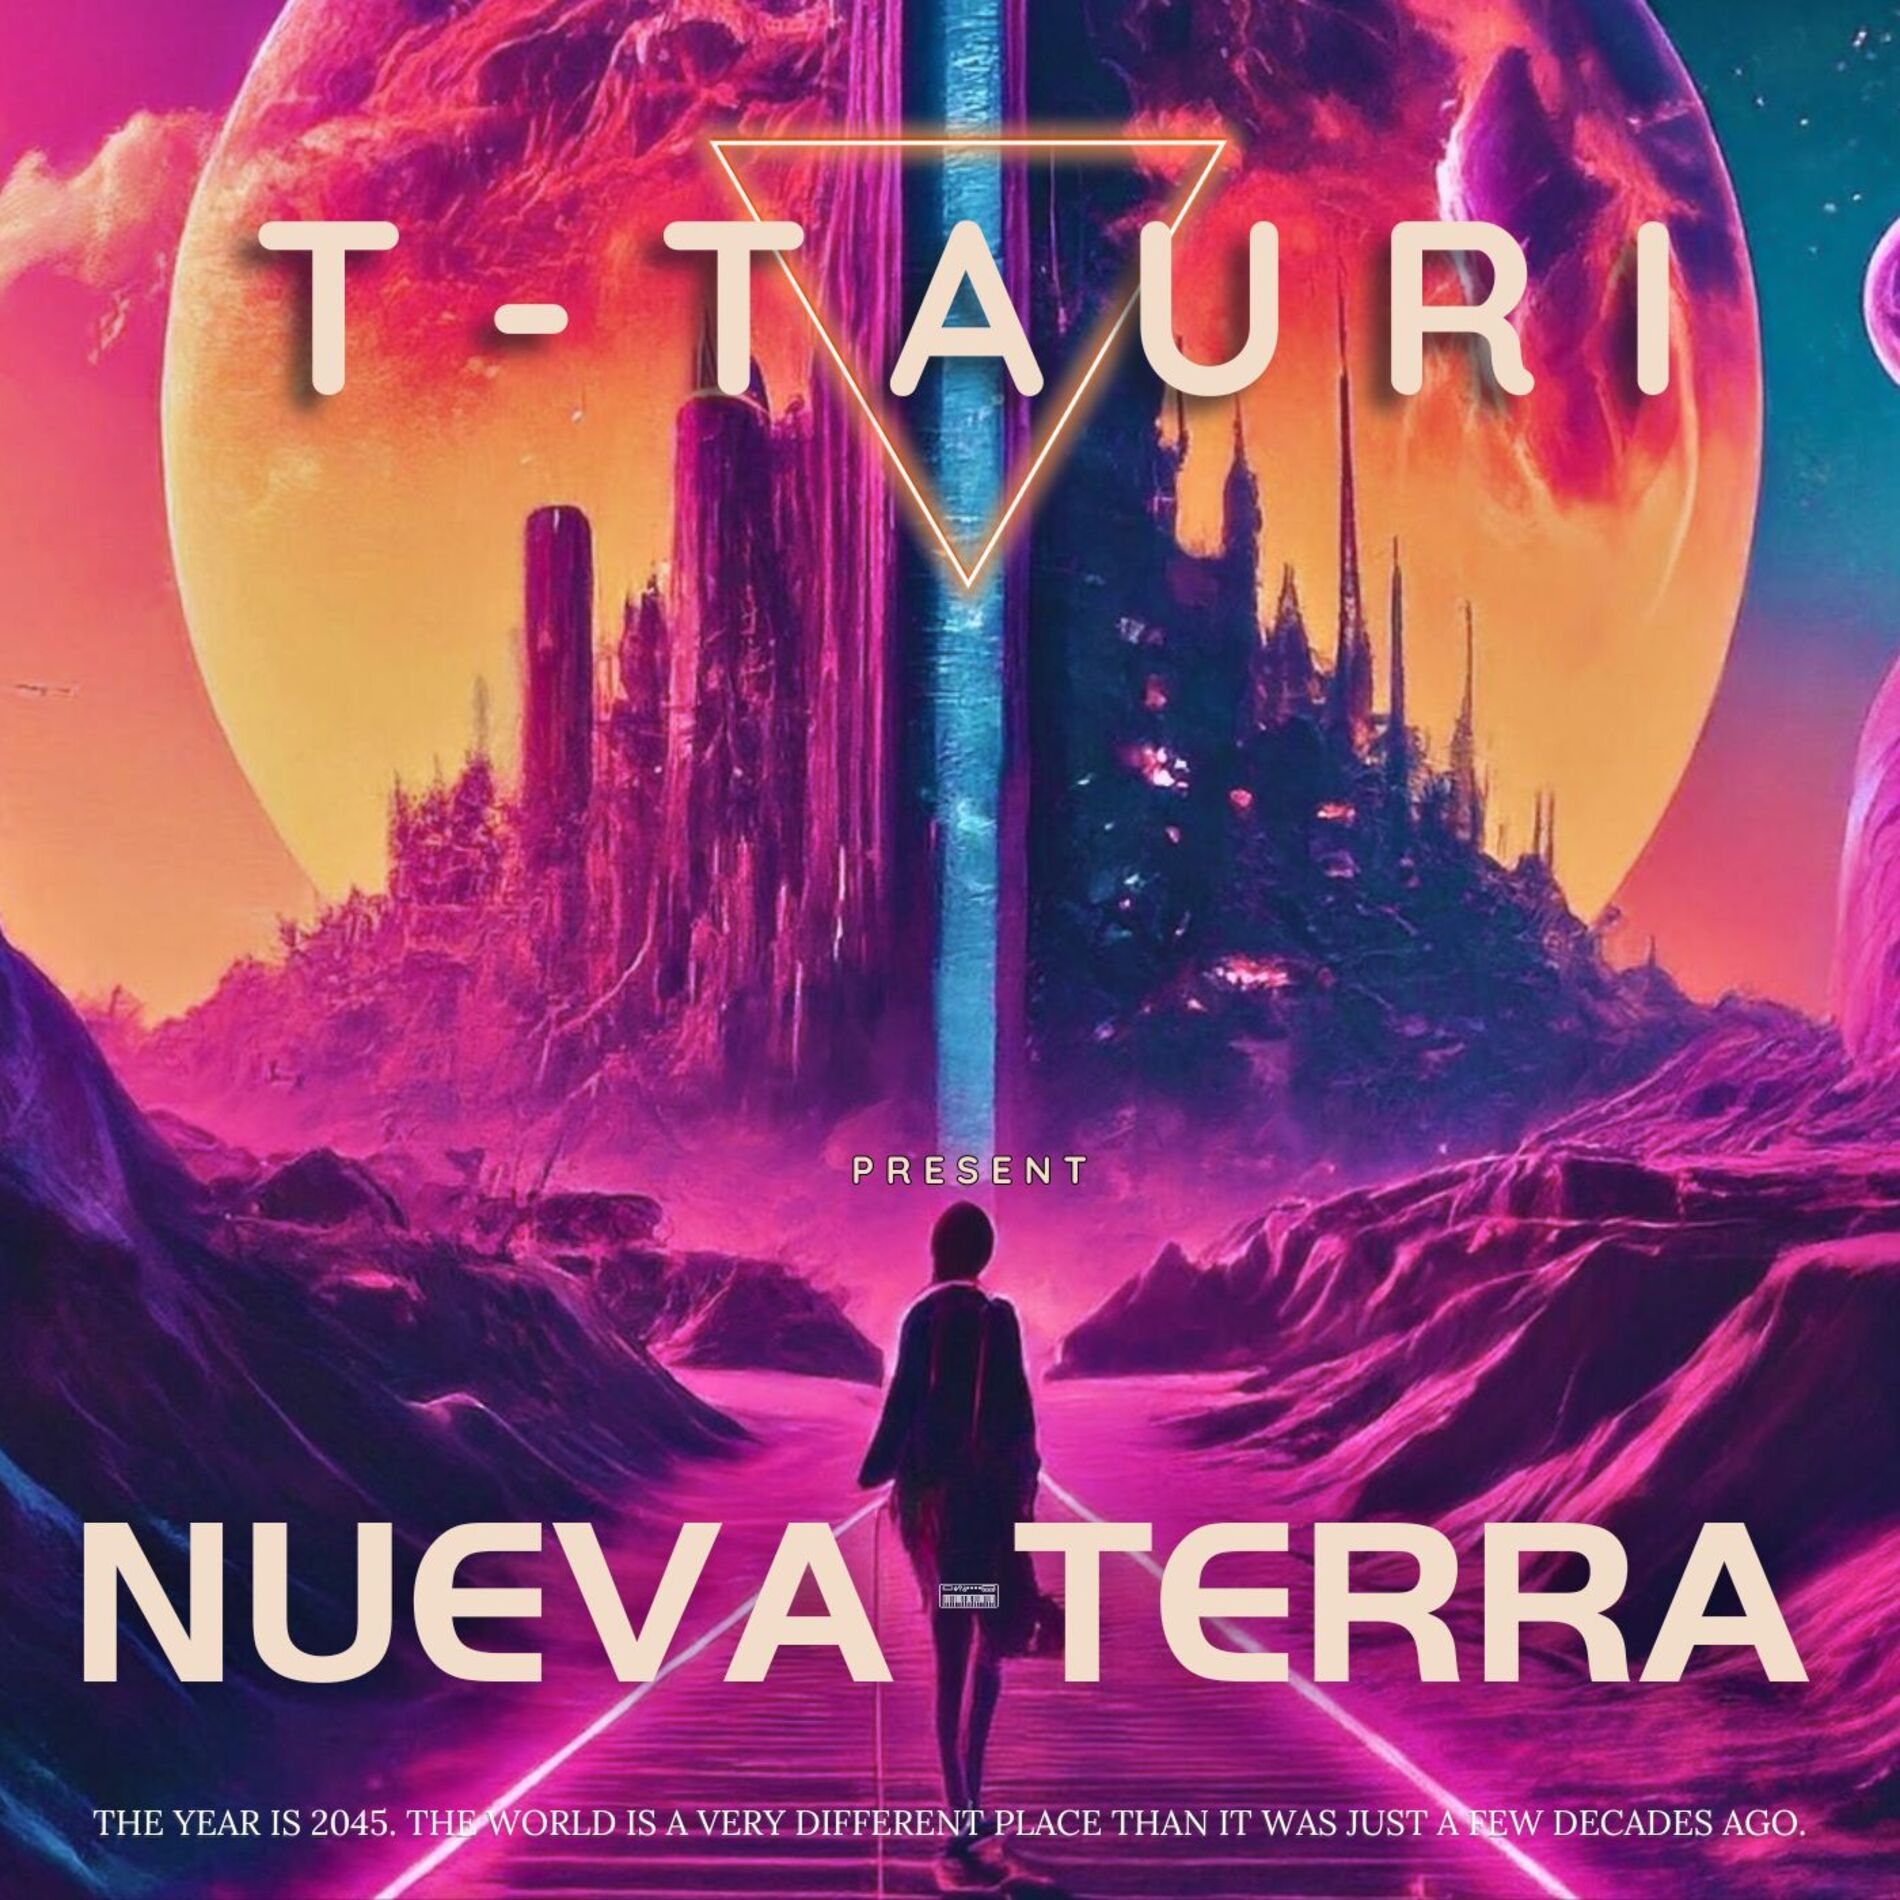 Captivating songwriter and artist T-Tauri creates new worlds with ‘Nueva -Terra’